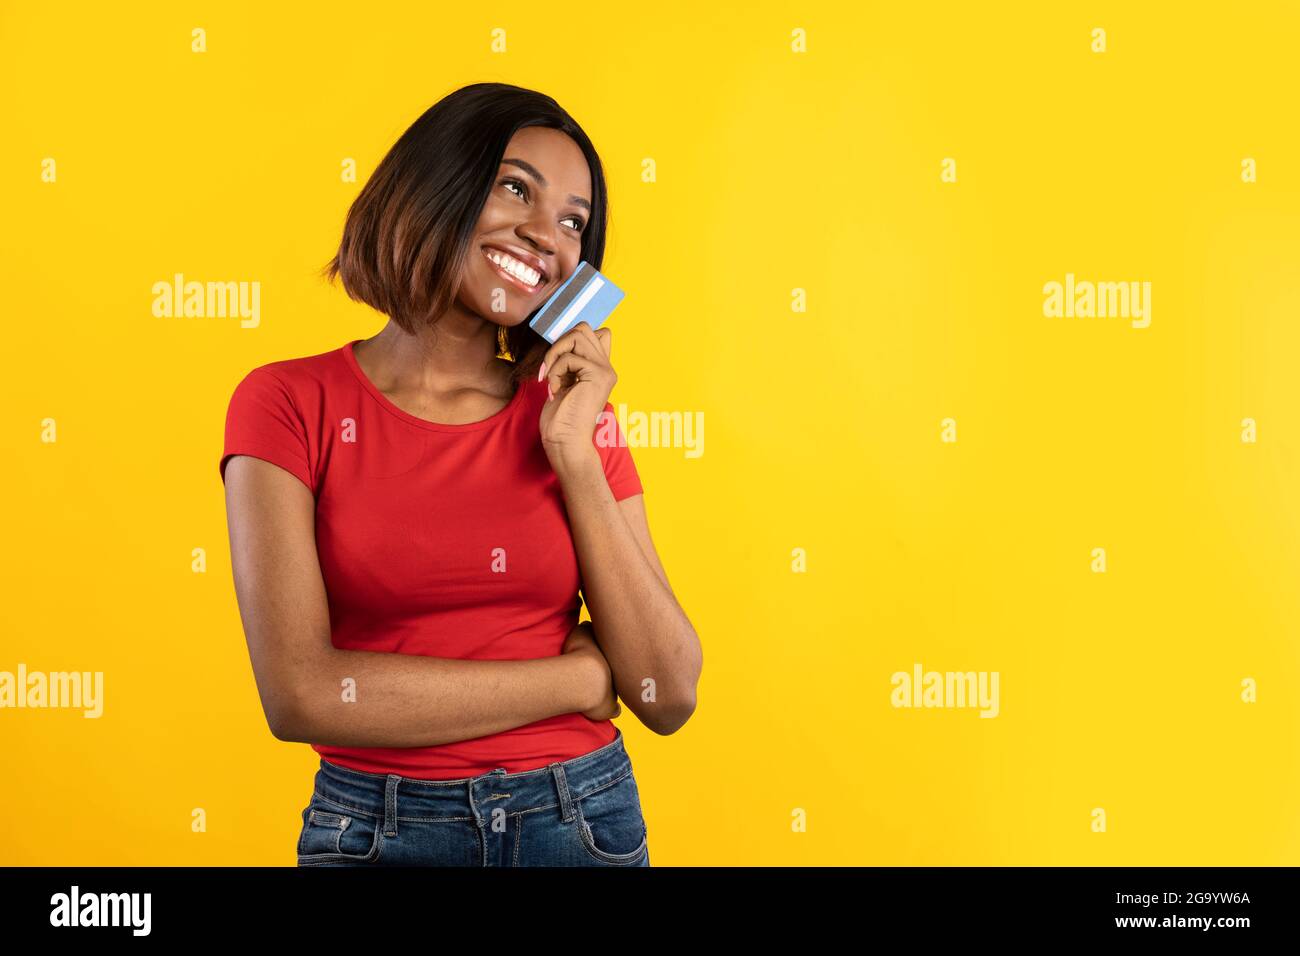 African Female Posing With Credit Card Dreaming About Shopping, Studio Stock Photo